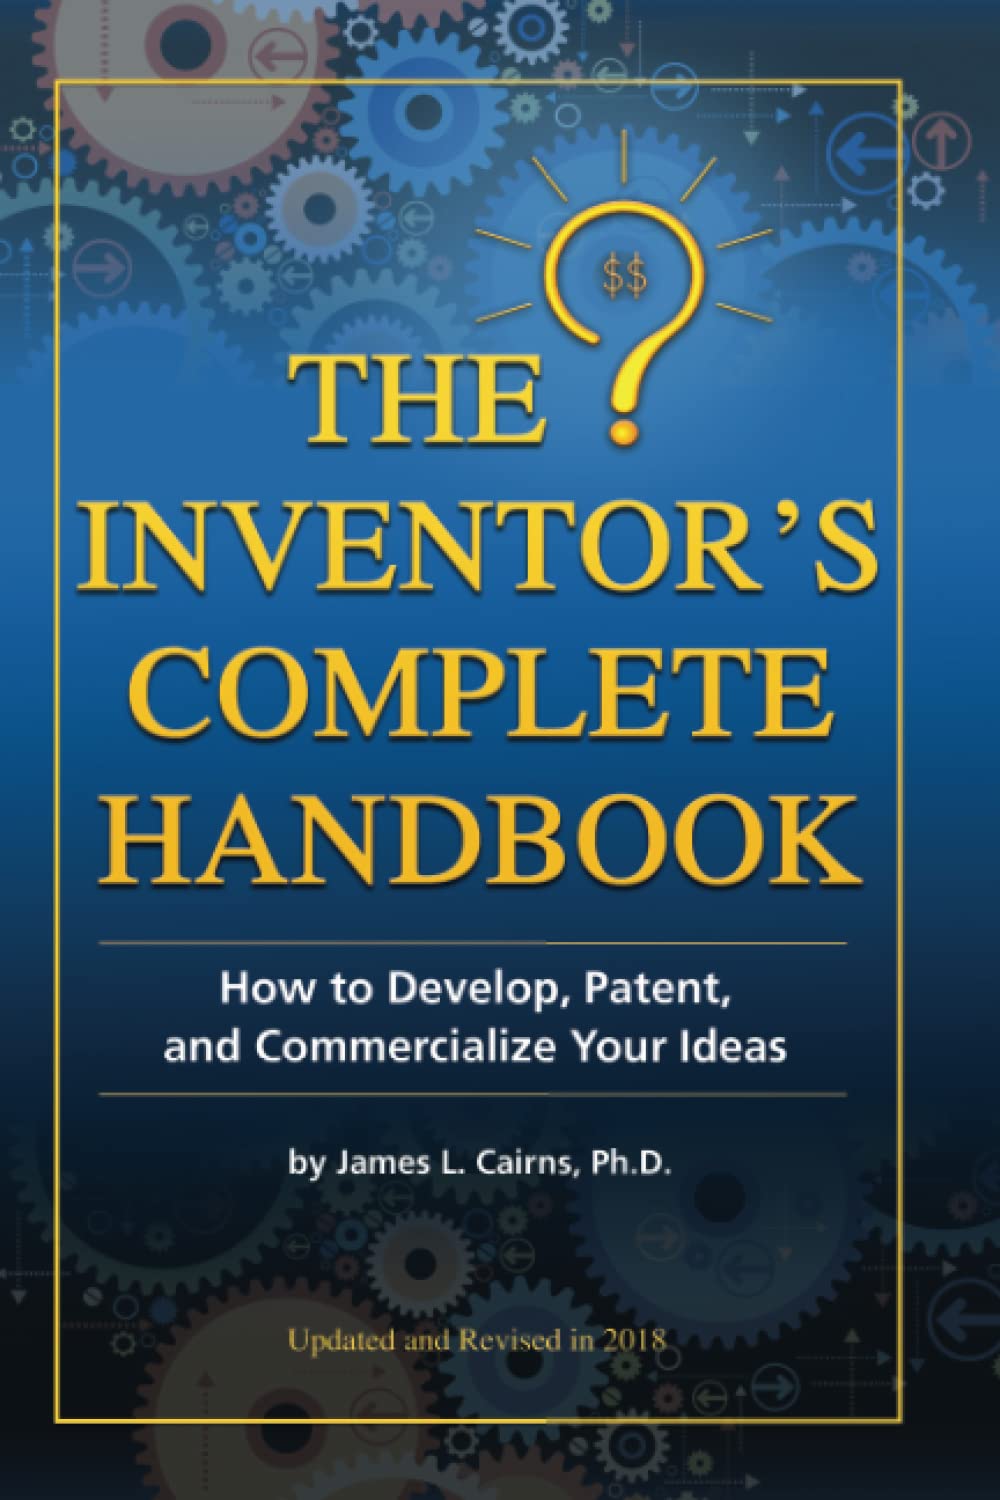 Book Cover The Inventor's Complete Handbook How to Develop, Patent, and Commercialize Your Ideas: How to Develop, Patent, and Commercialize Your Ideas